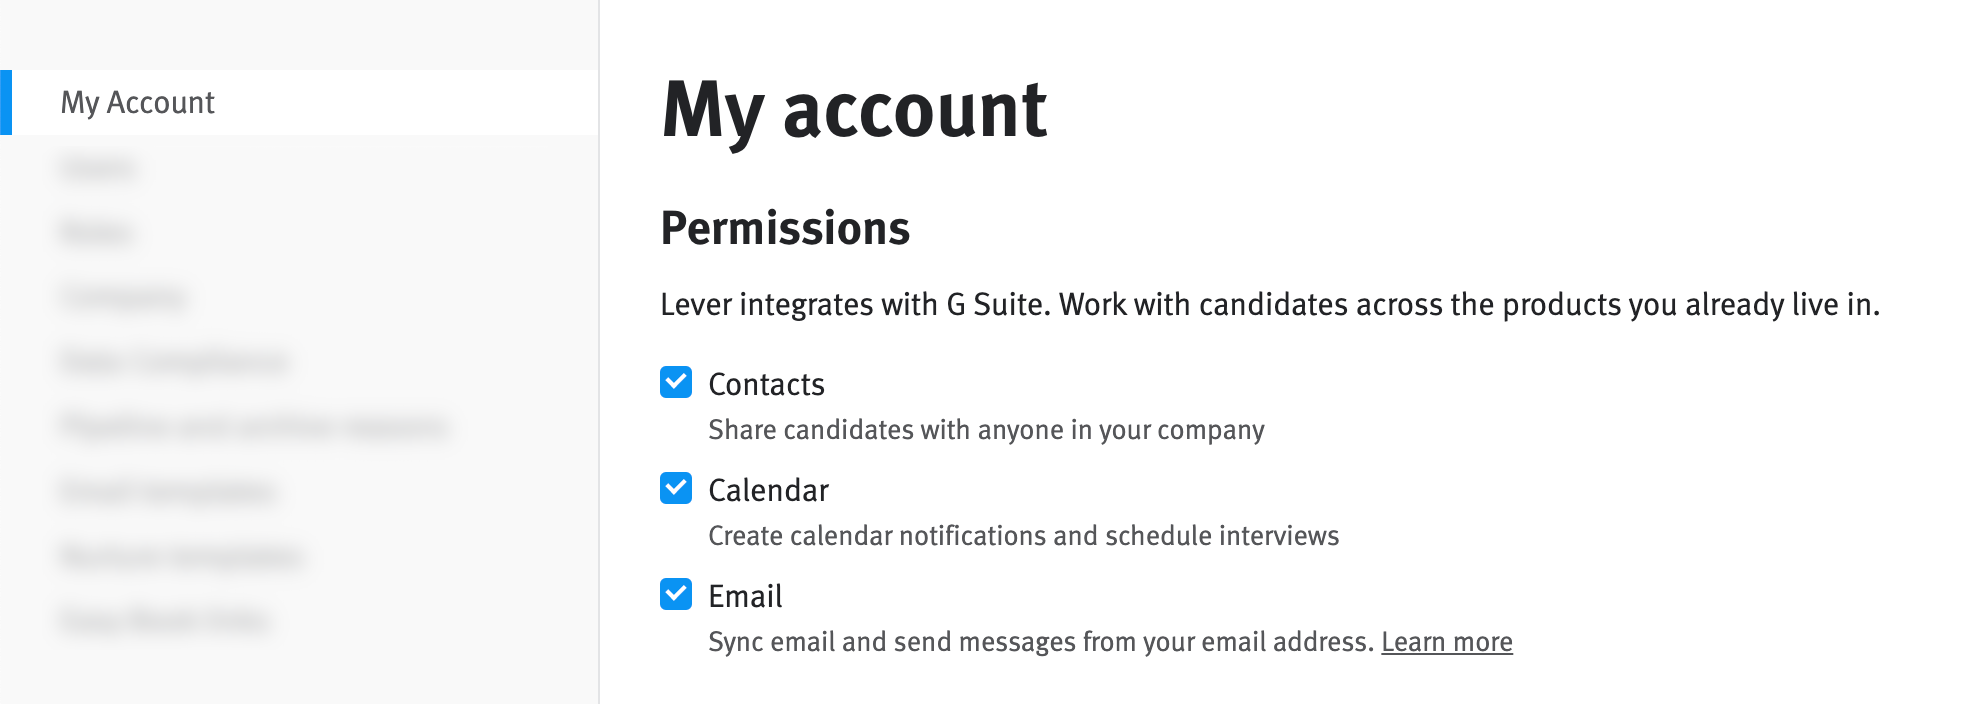 Permissions checkboxs on My account settings page